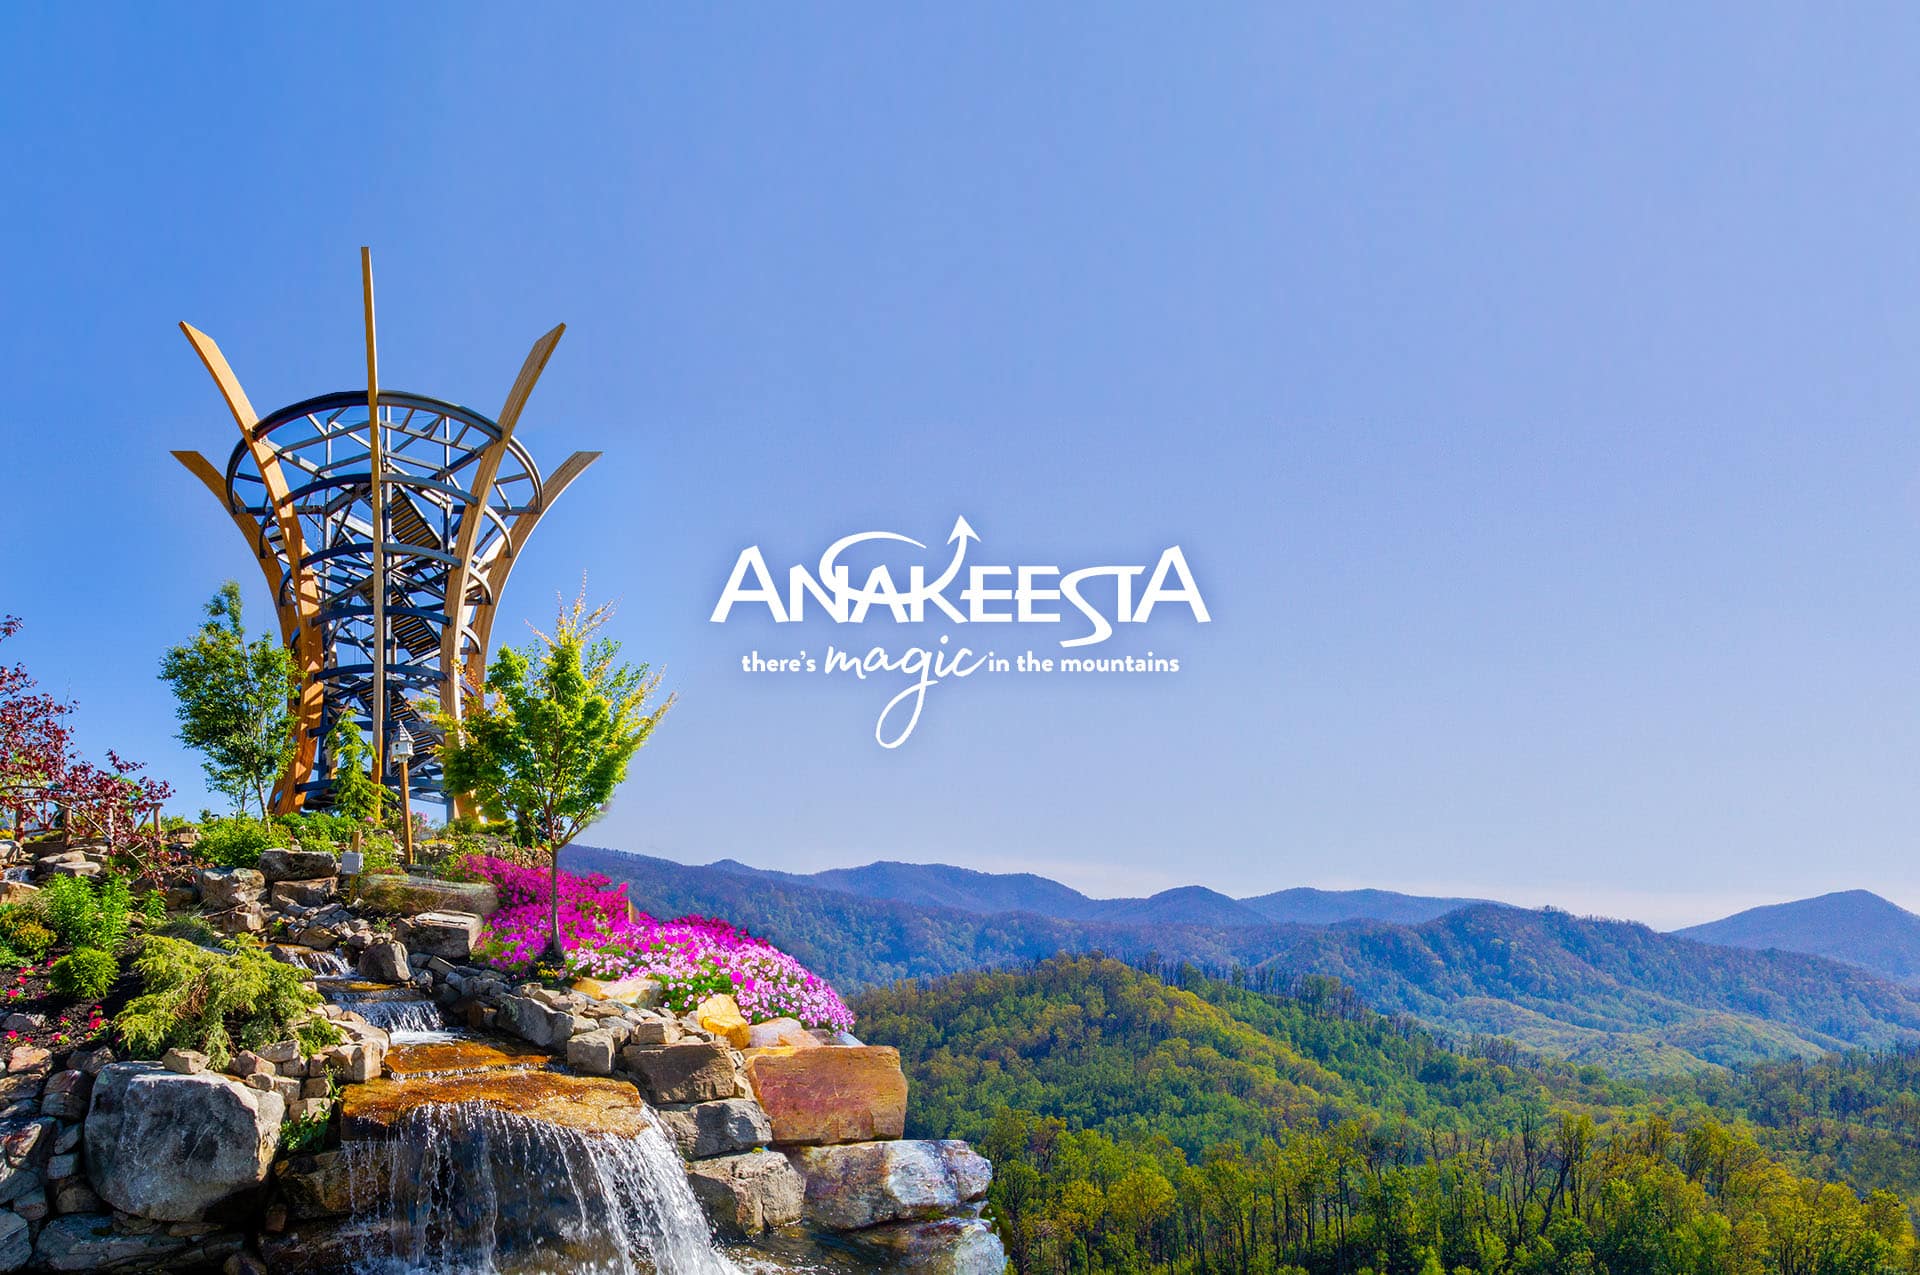 New Gatlinburg Attraction, Anakeesta, is Scenic, Fun and Family Friendly